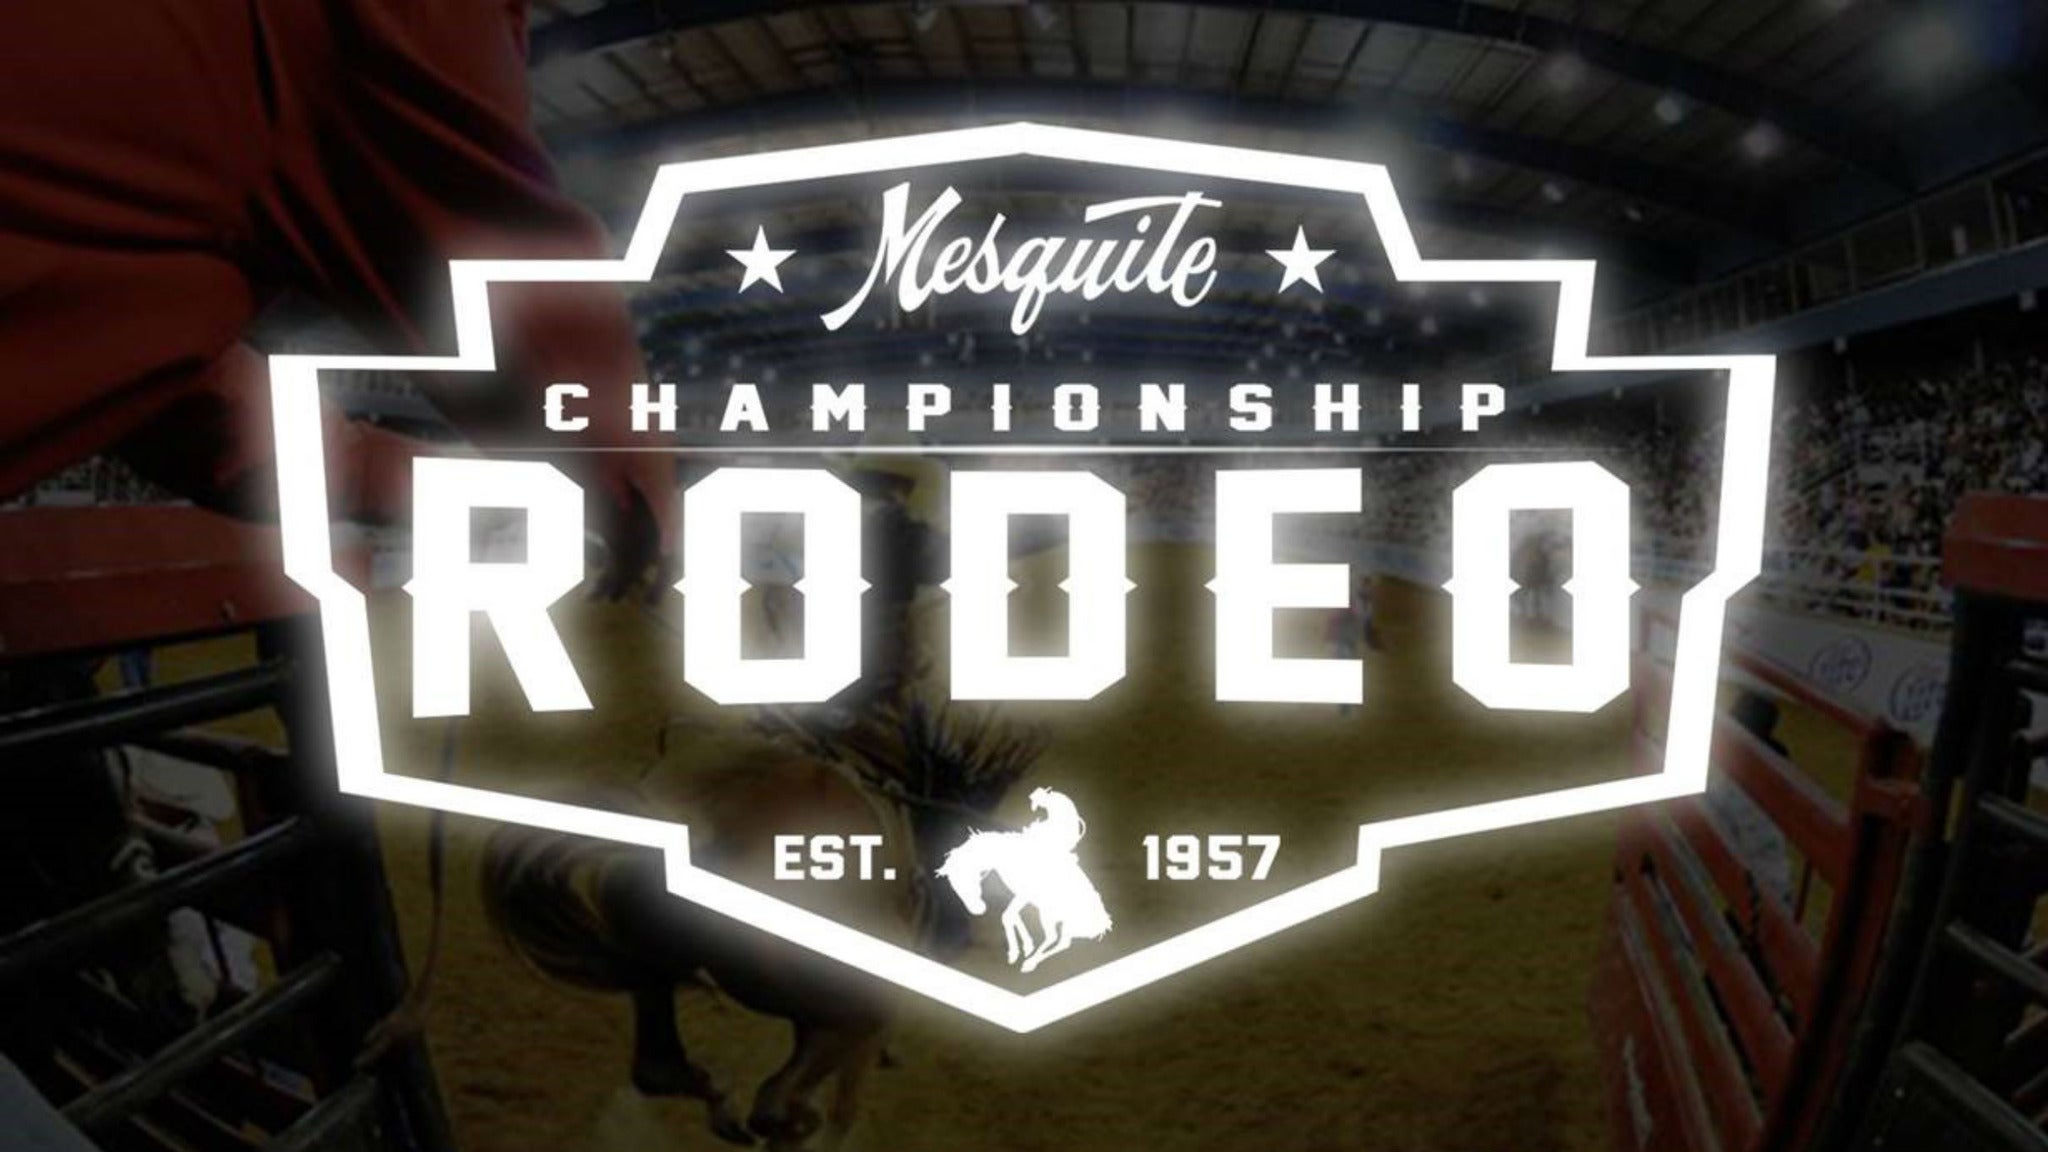 Mesquite Championship Rodeo Tickets Single Game Tickets & Schedule